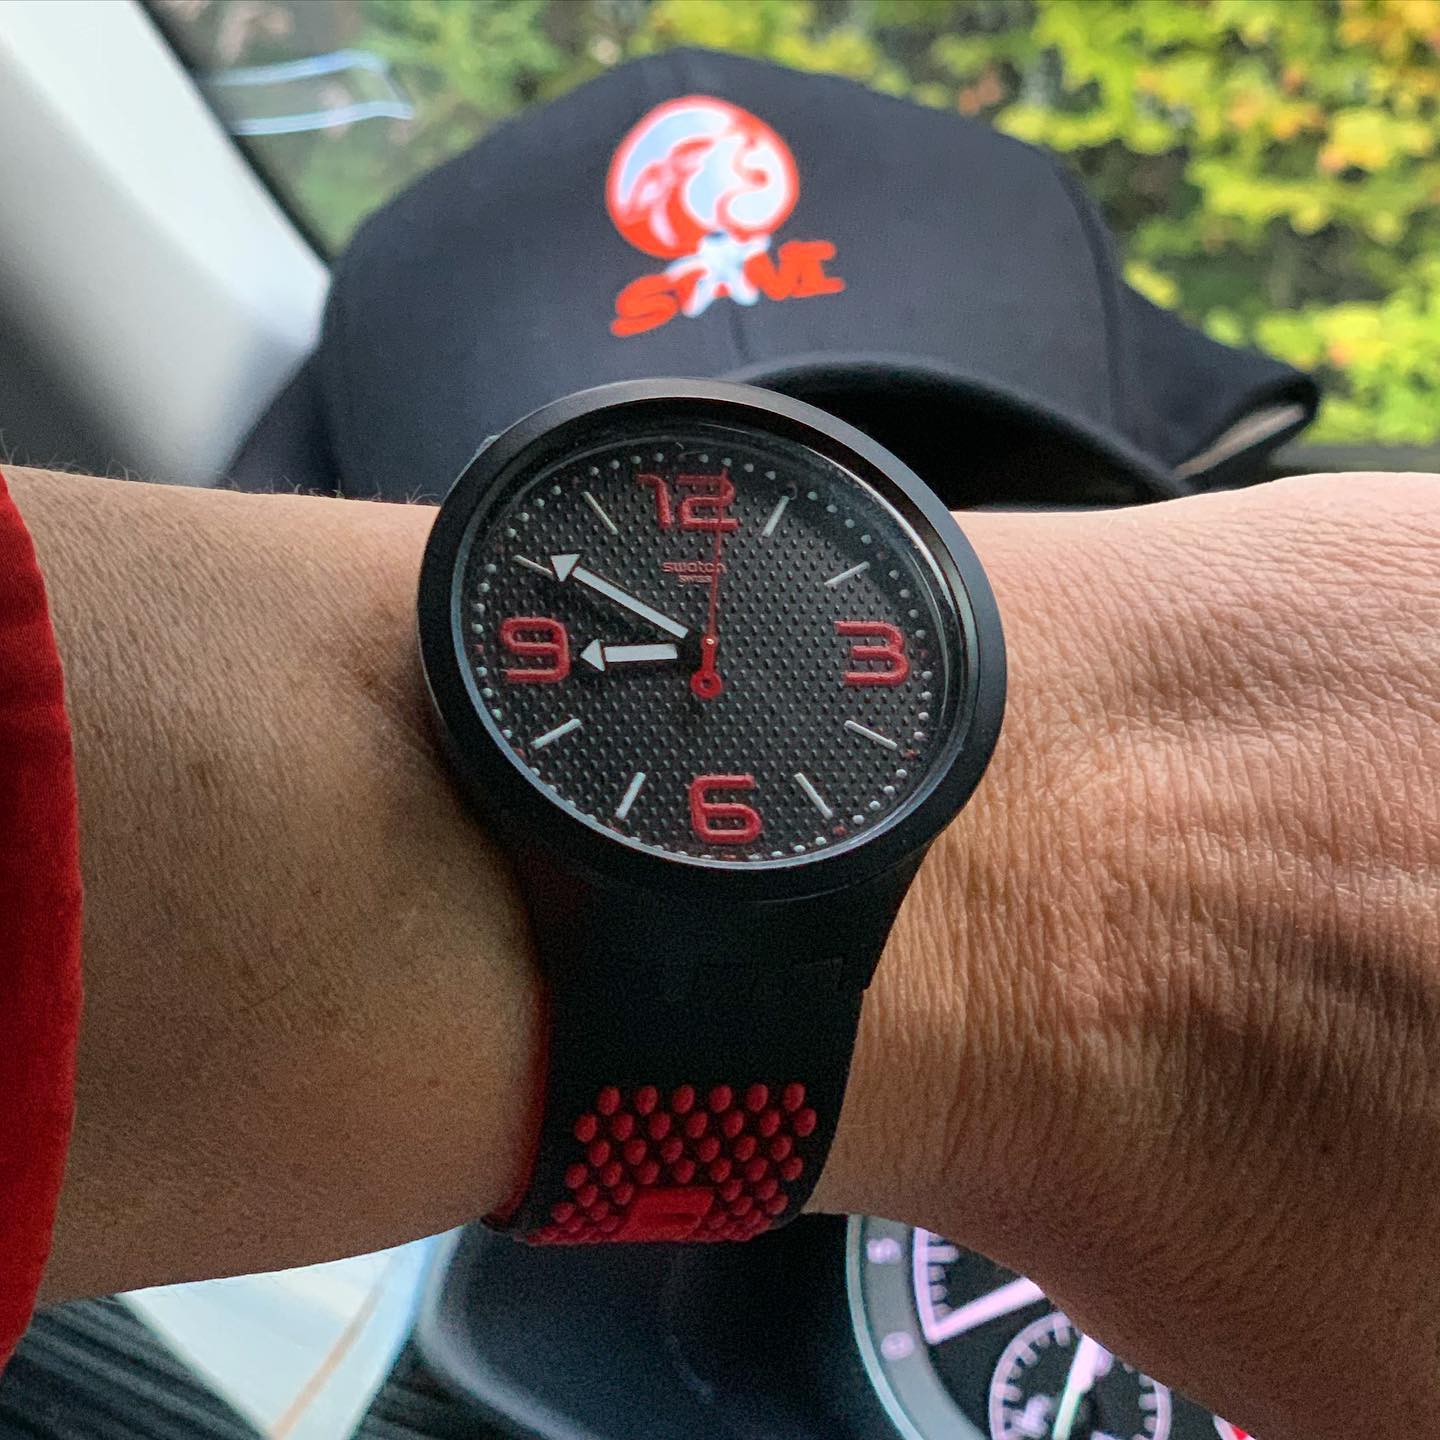 My Swatch Big Bold Blood for this day.